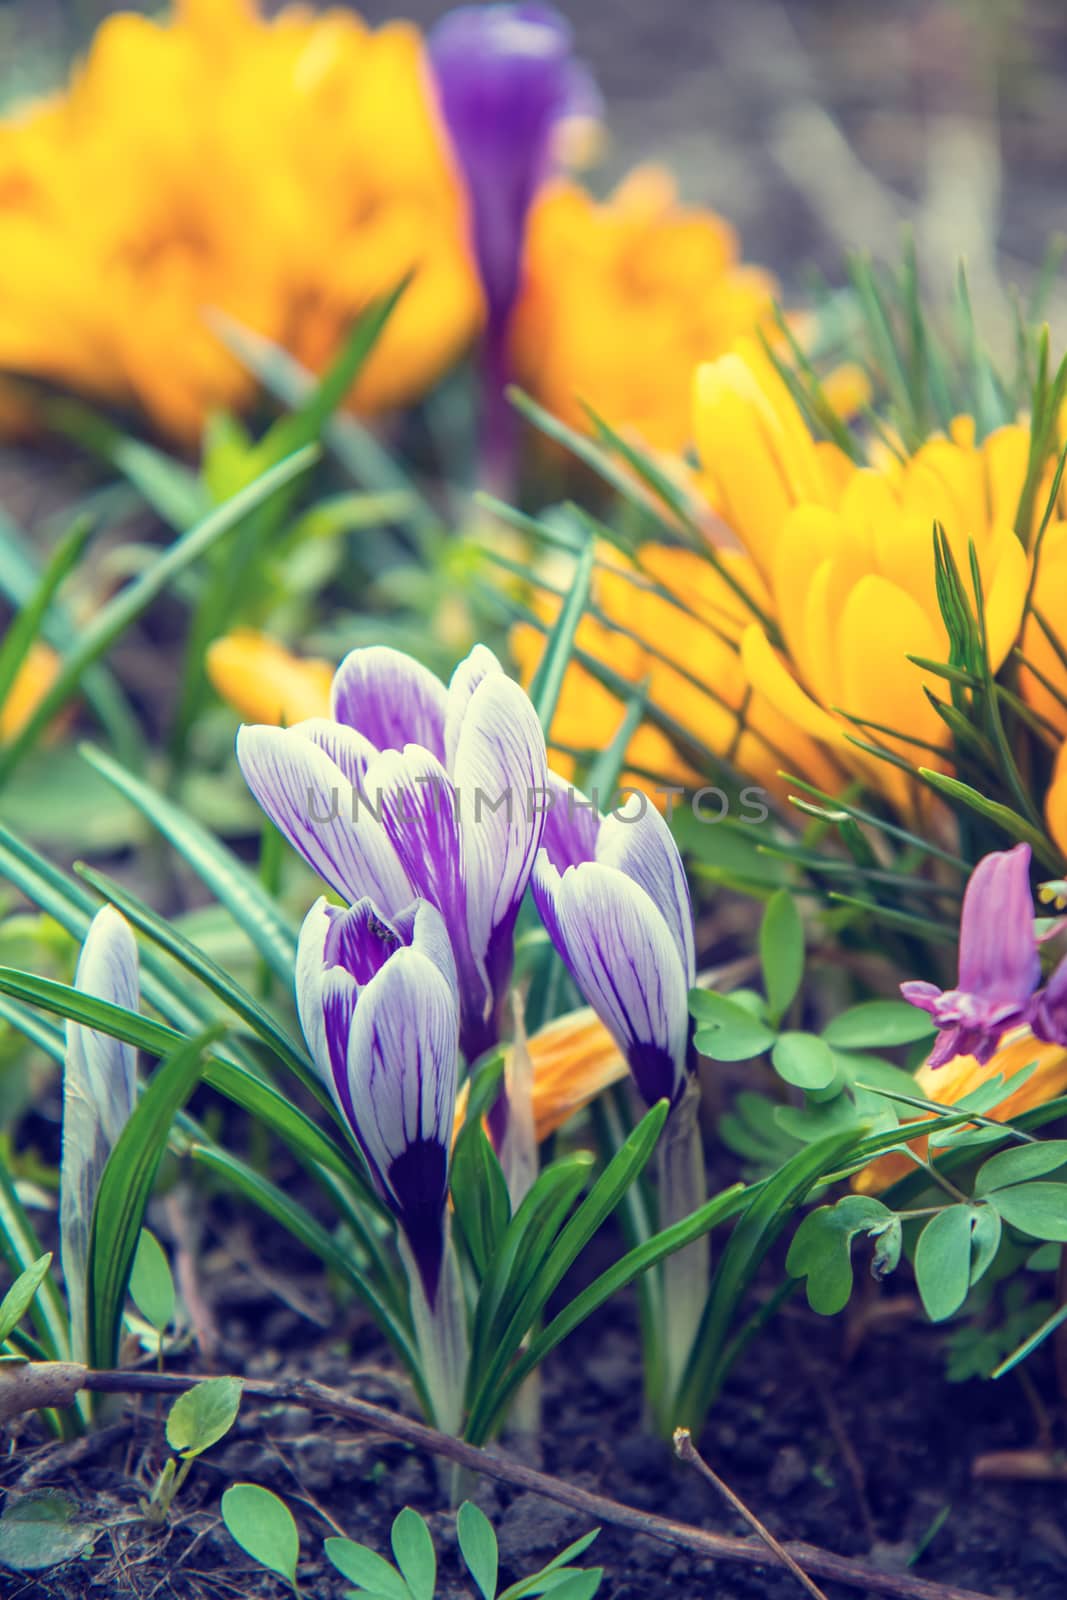  flowers crocuses on bokeh background in sunny spring forest und by ArtSvitlyna